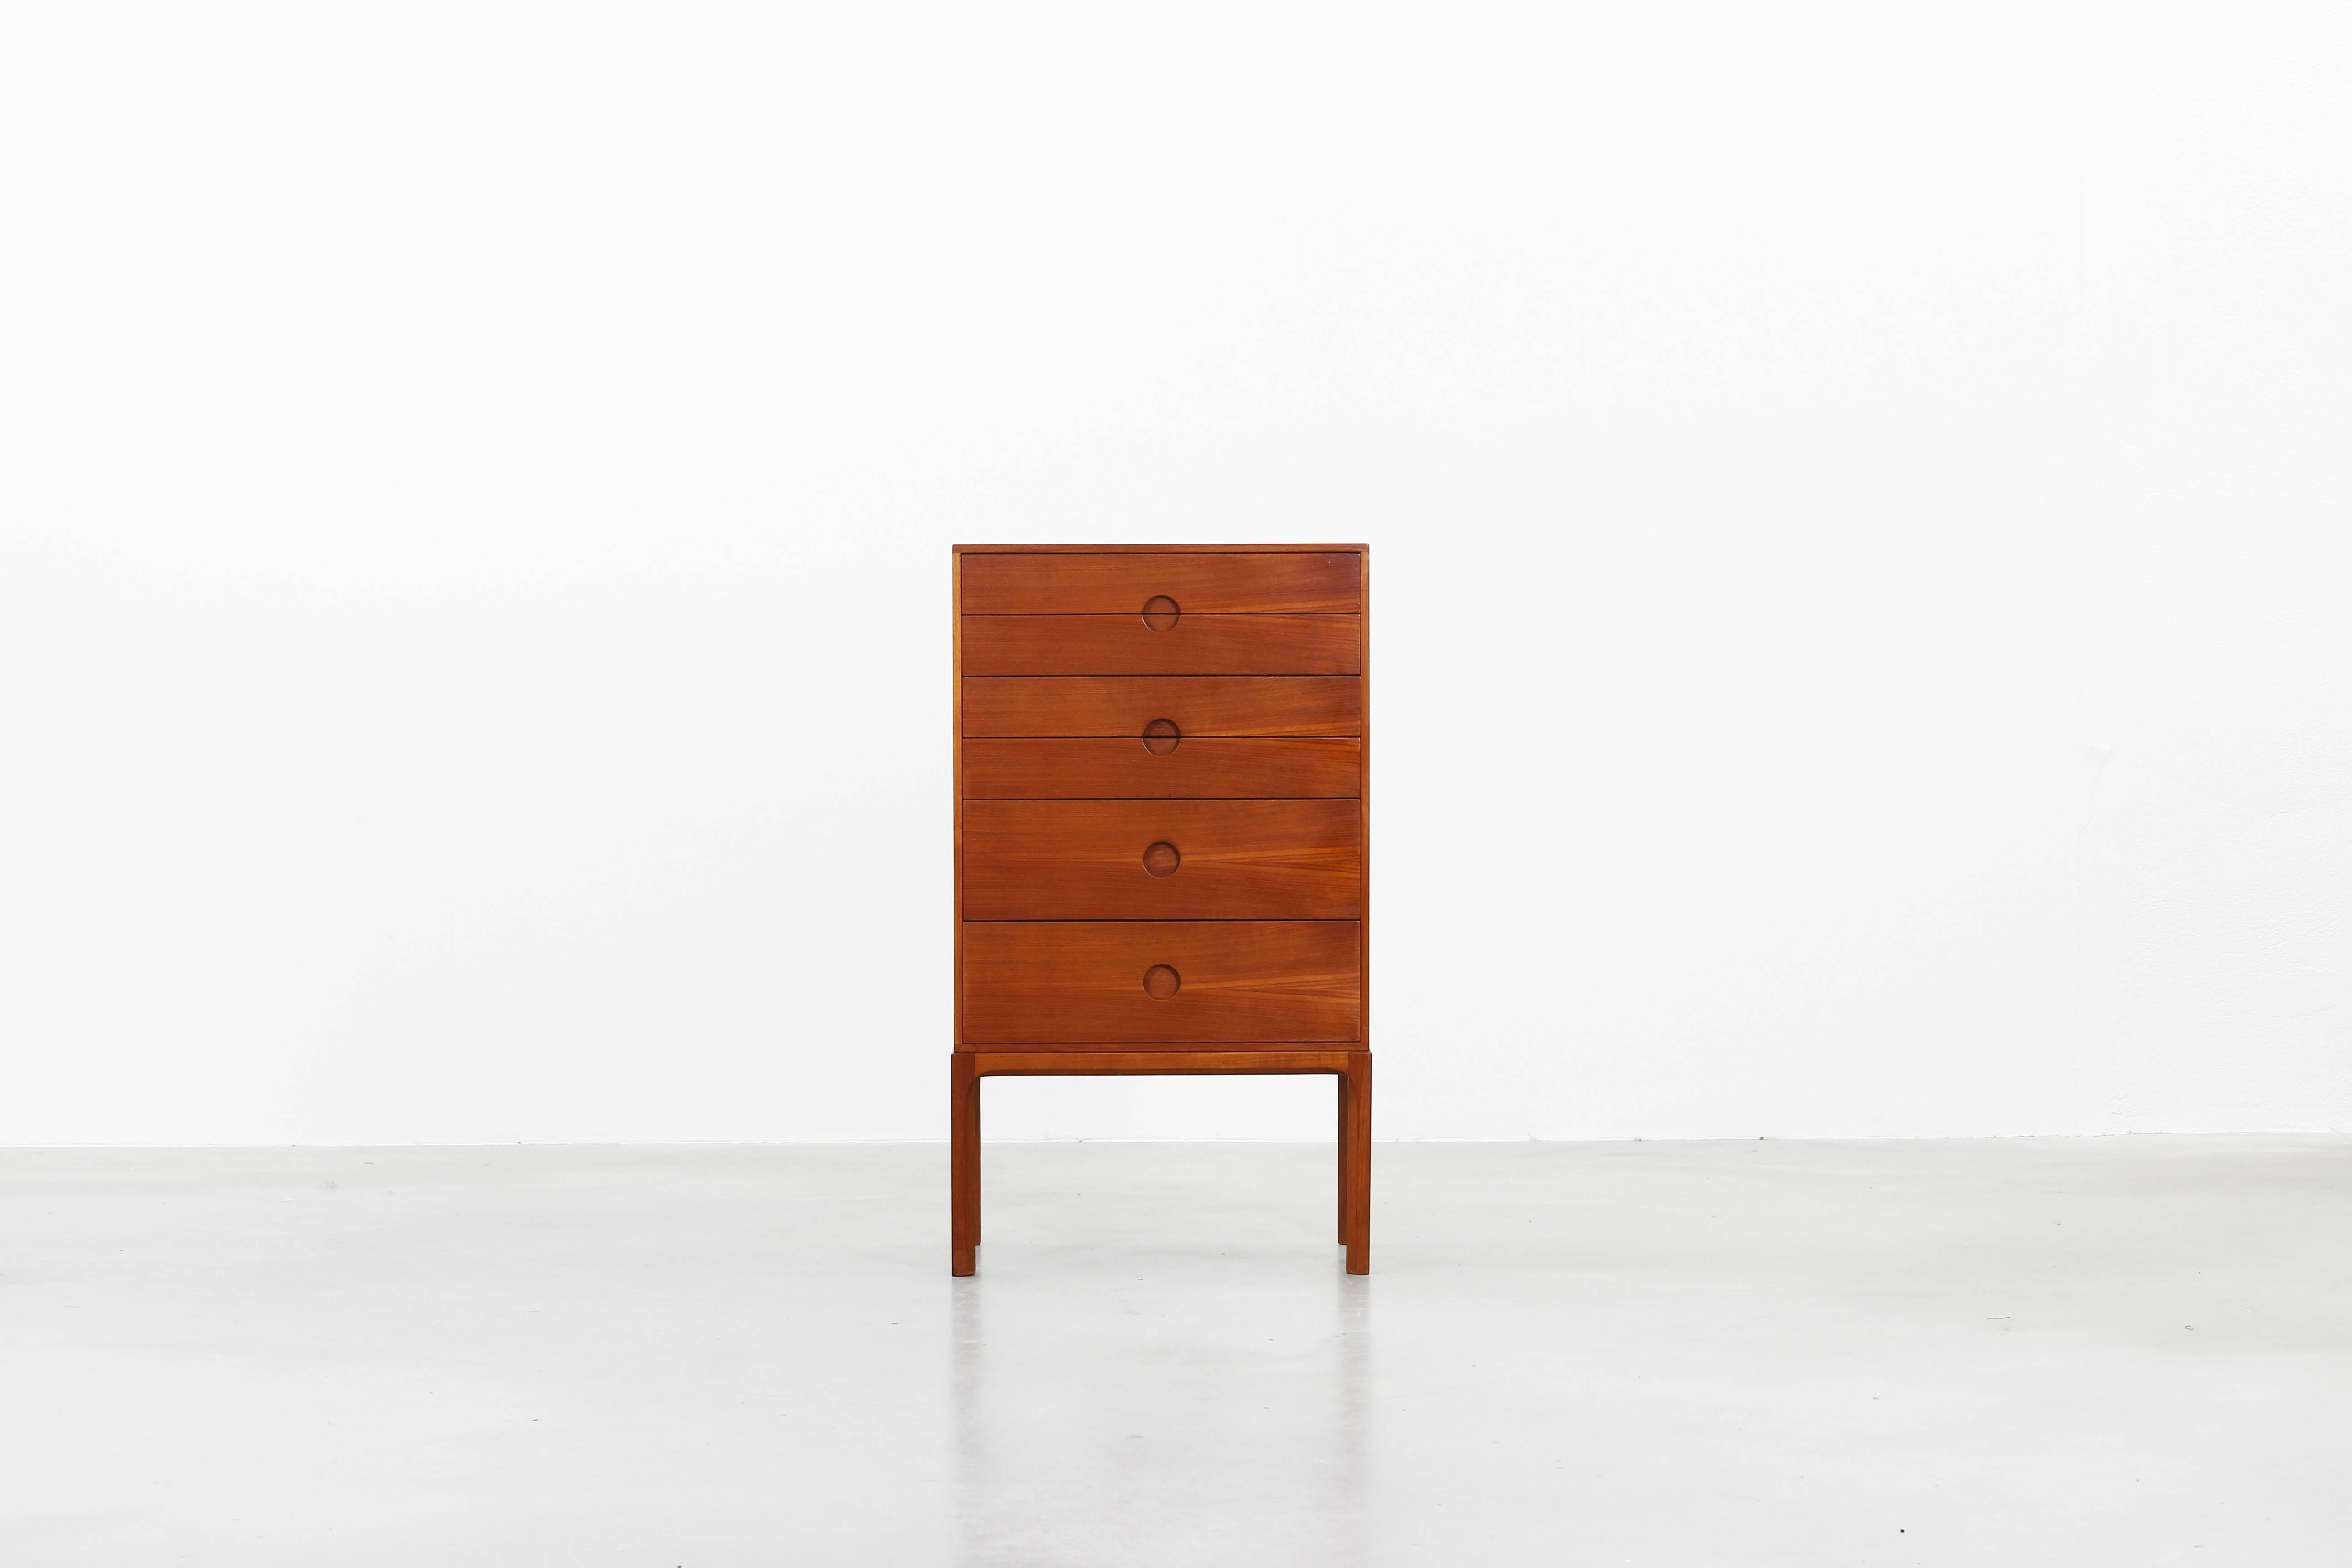 Very beautiful chest of drawers designed by Aksel Kjersgaard for his furniture company "Aksel Kjersgaard Møbler" in Odder, Denmark. The chest of drawers is in an excellent condition with just little signs of use.
 
 Please do not